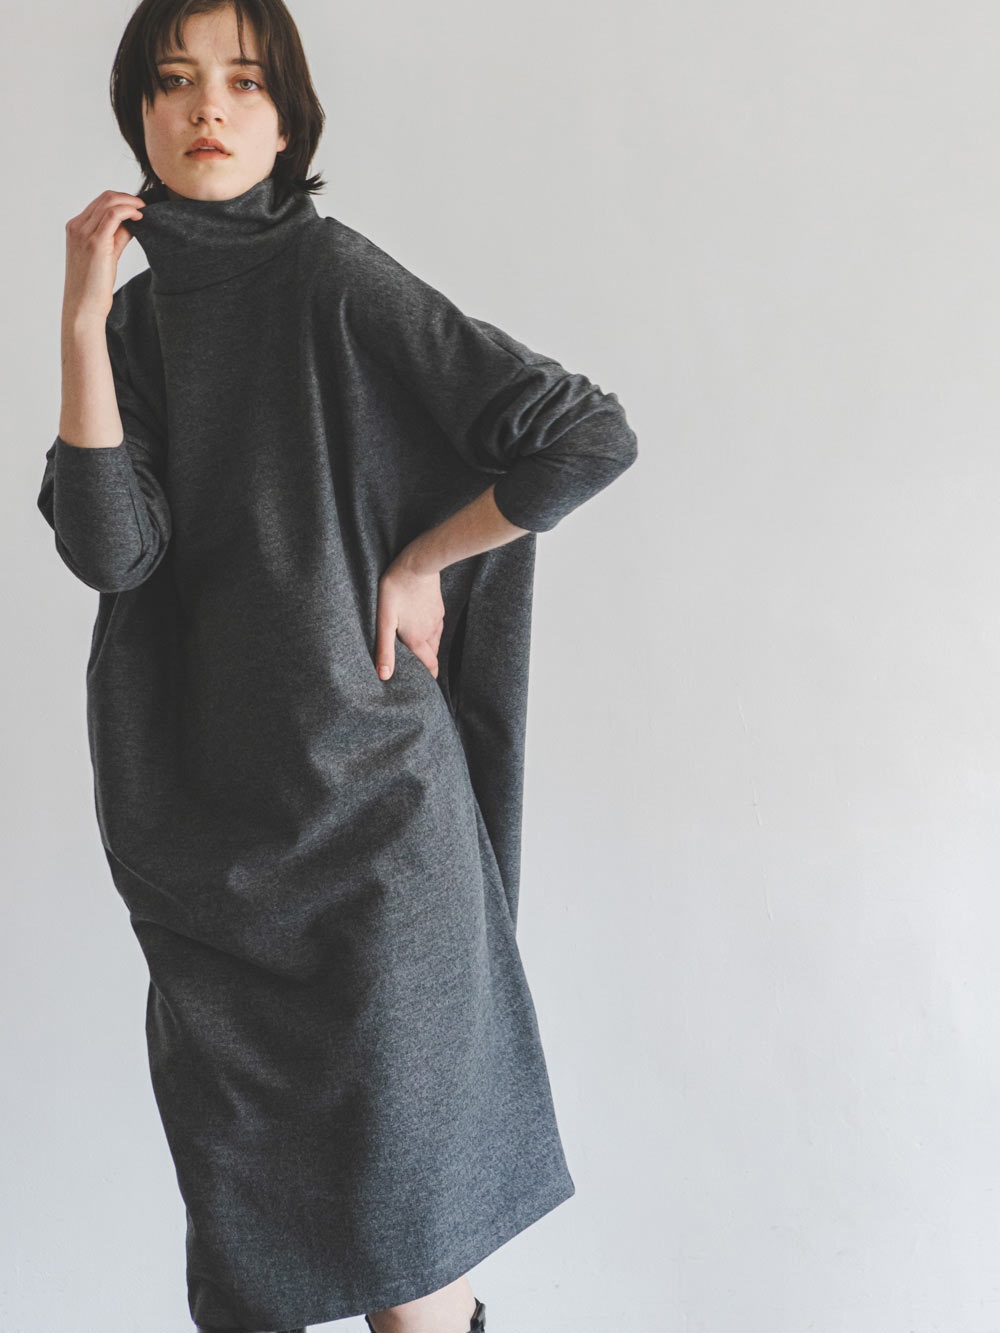 Compressed Wool Dress | Onepiece | Enchainement Online Store